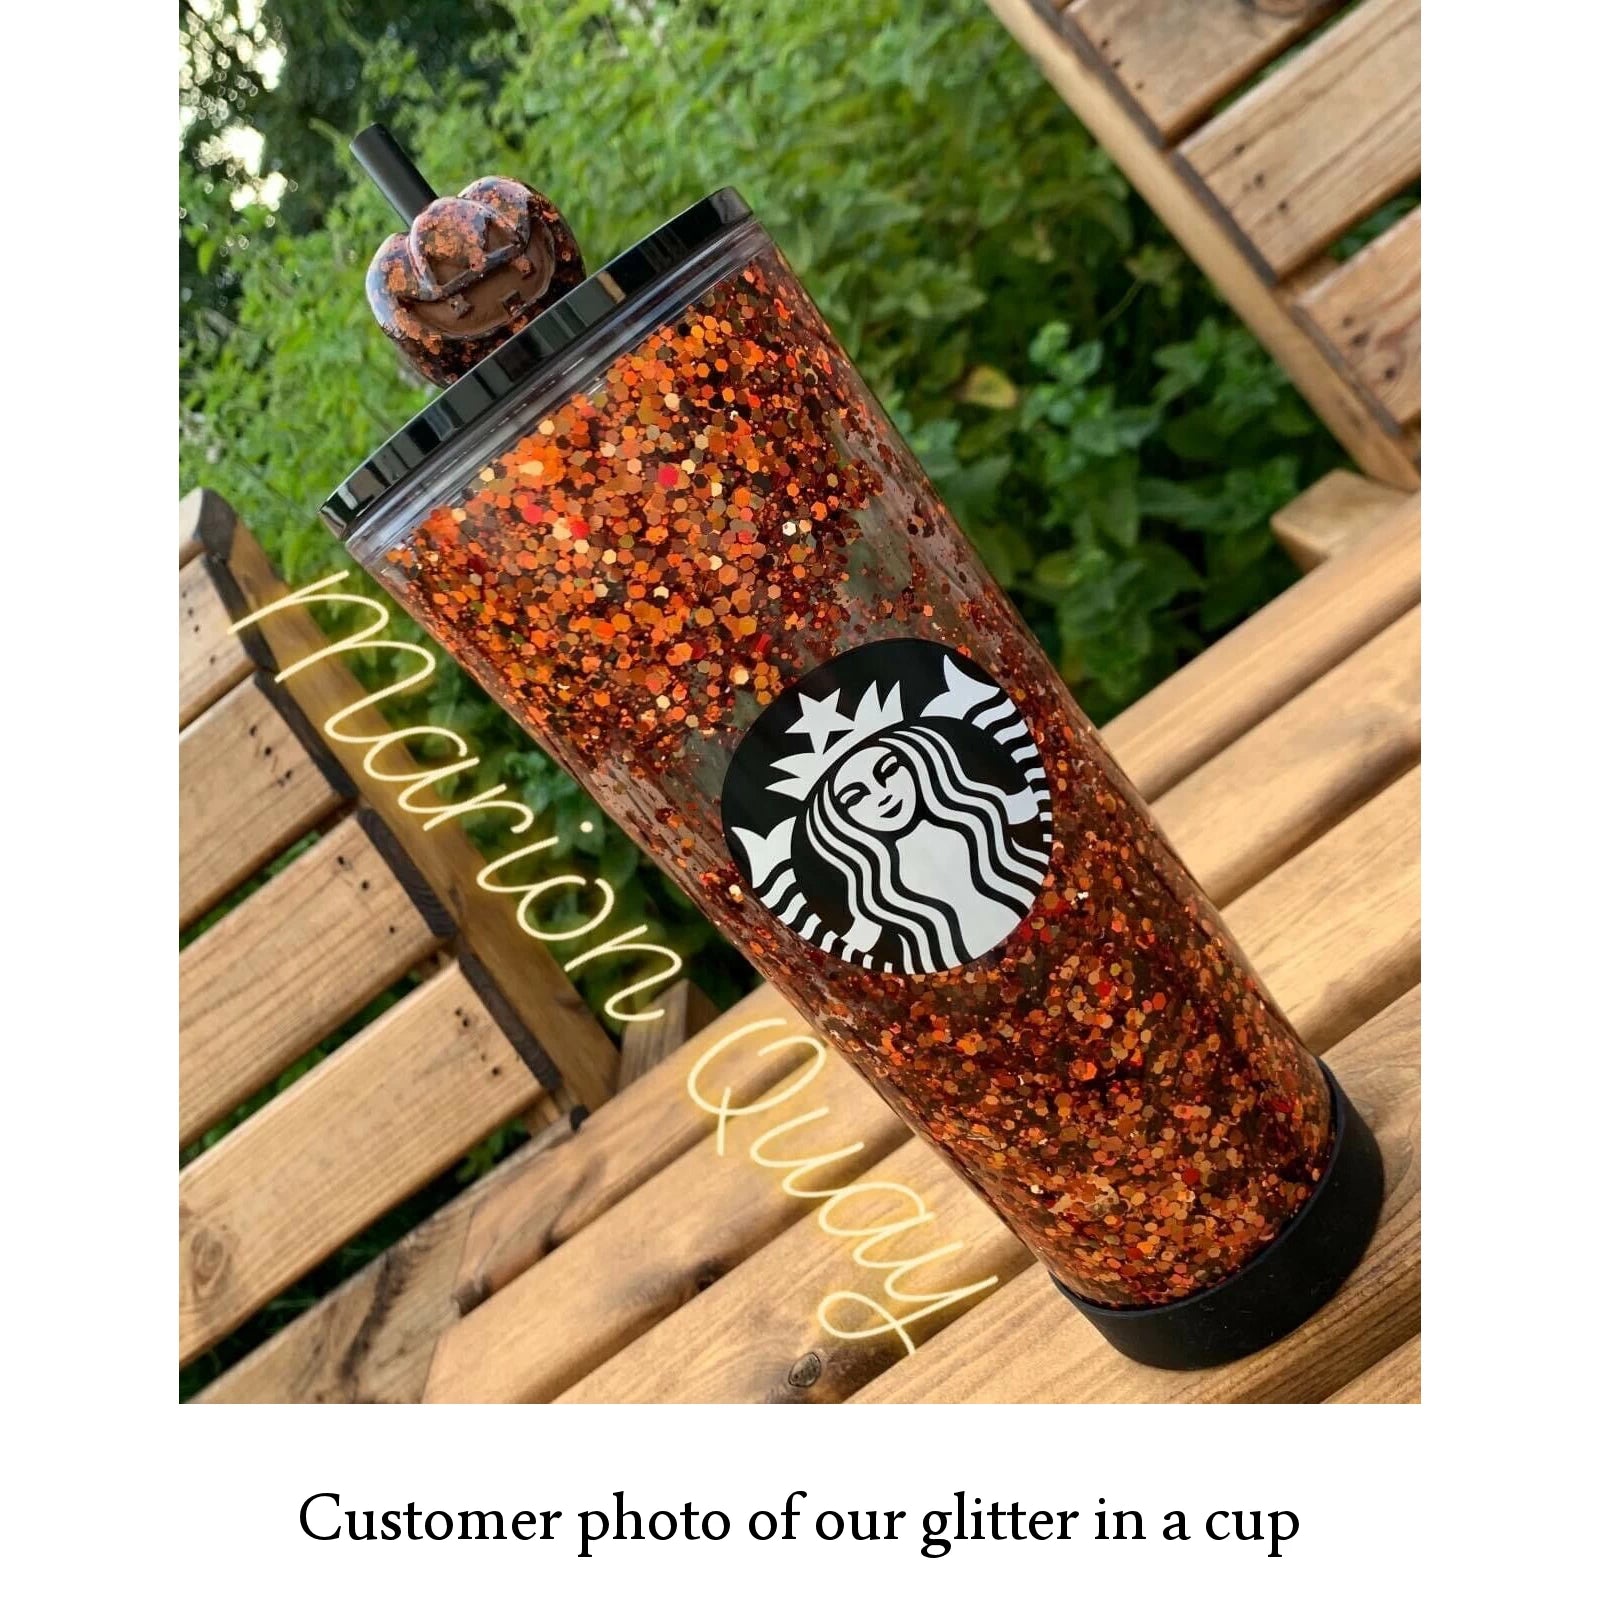 Customer photo of our orange holographic glitter used in a cup